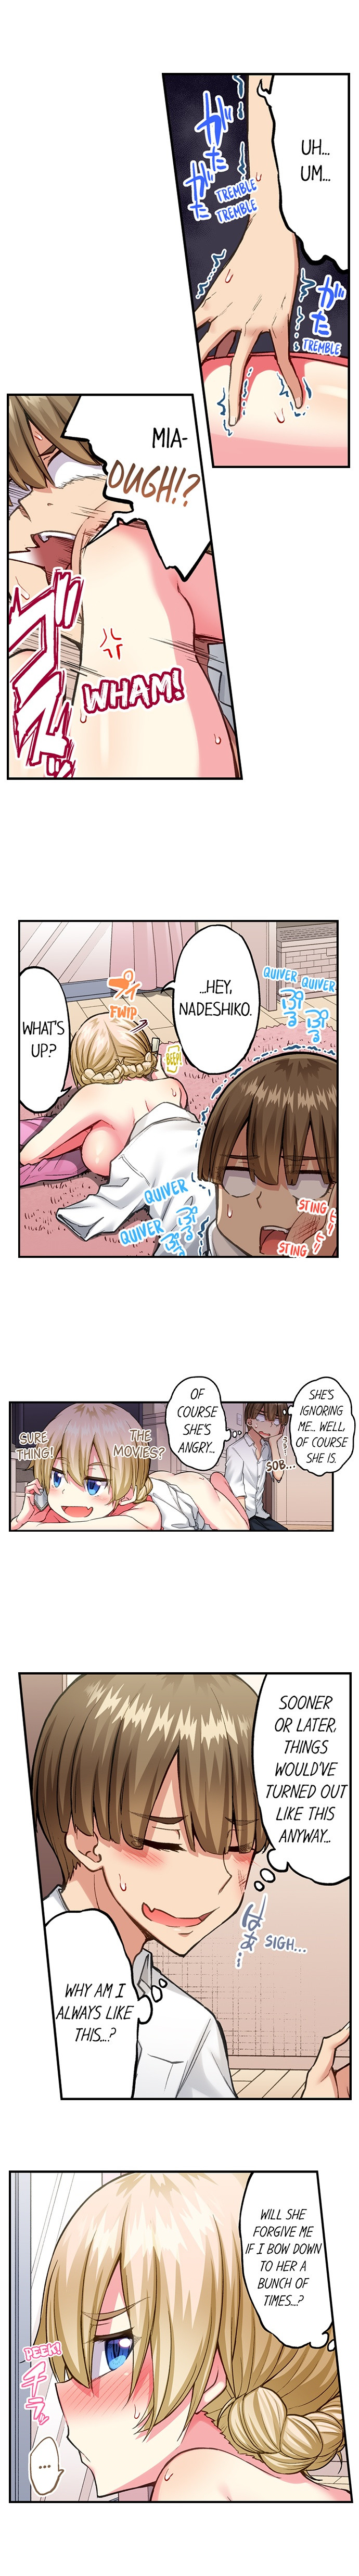 Traditional Job of Washing Girls’ Body - Chapter 205 Page 7